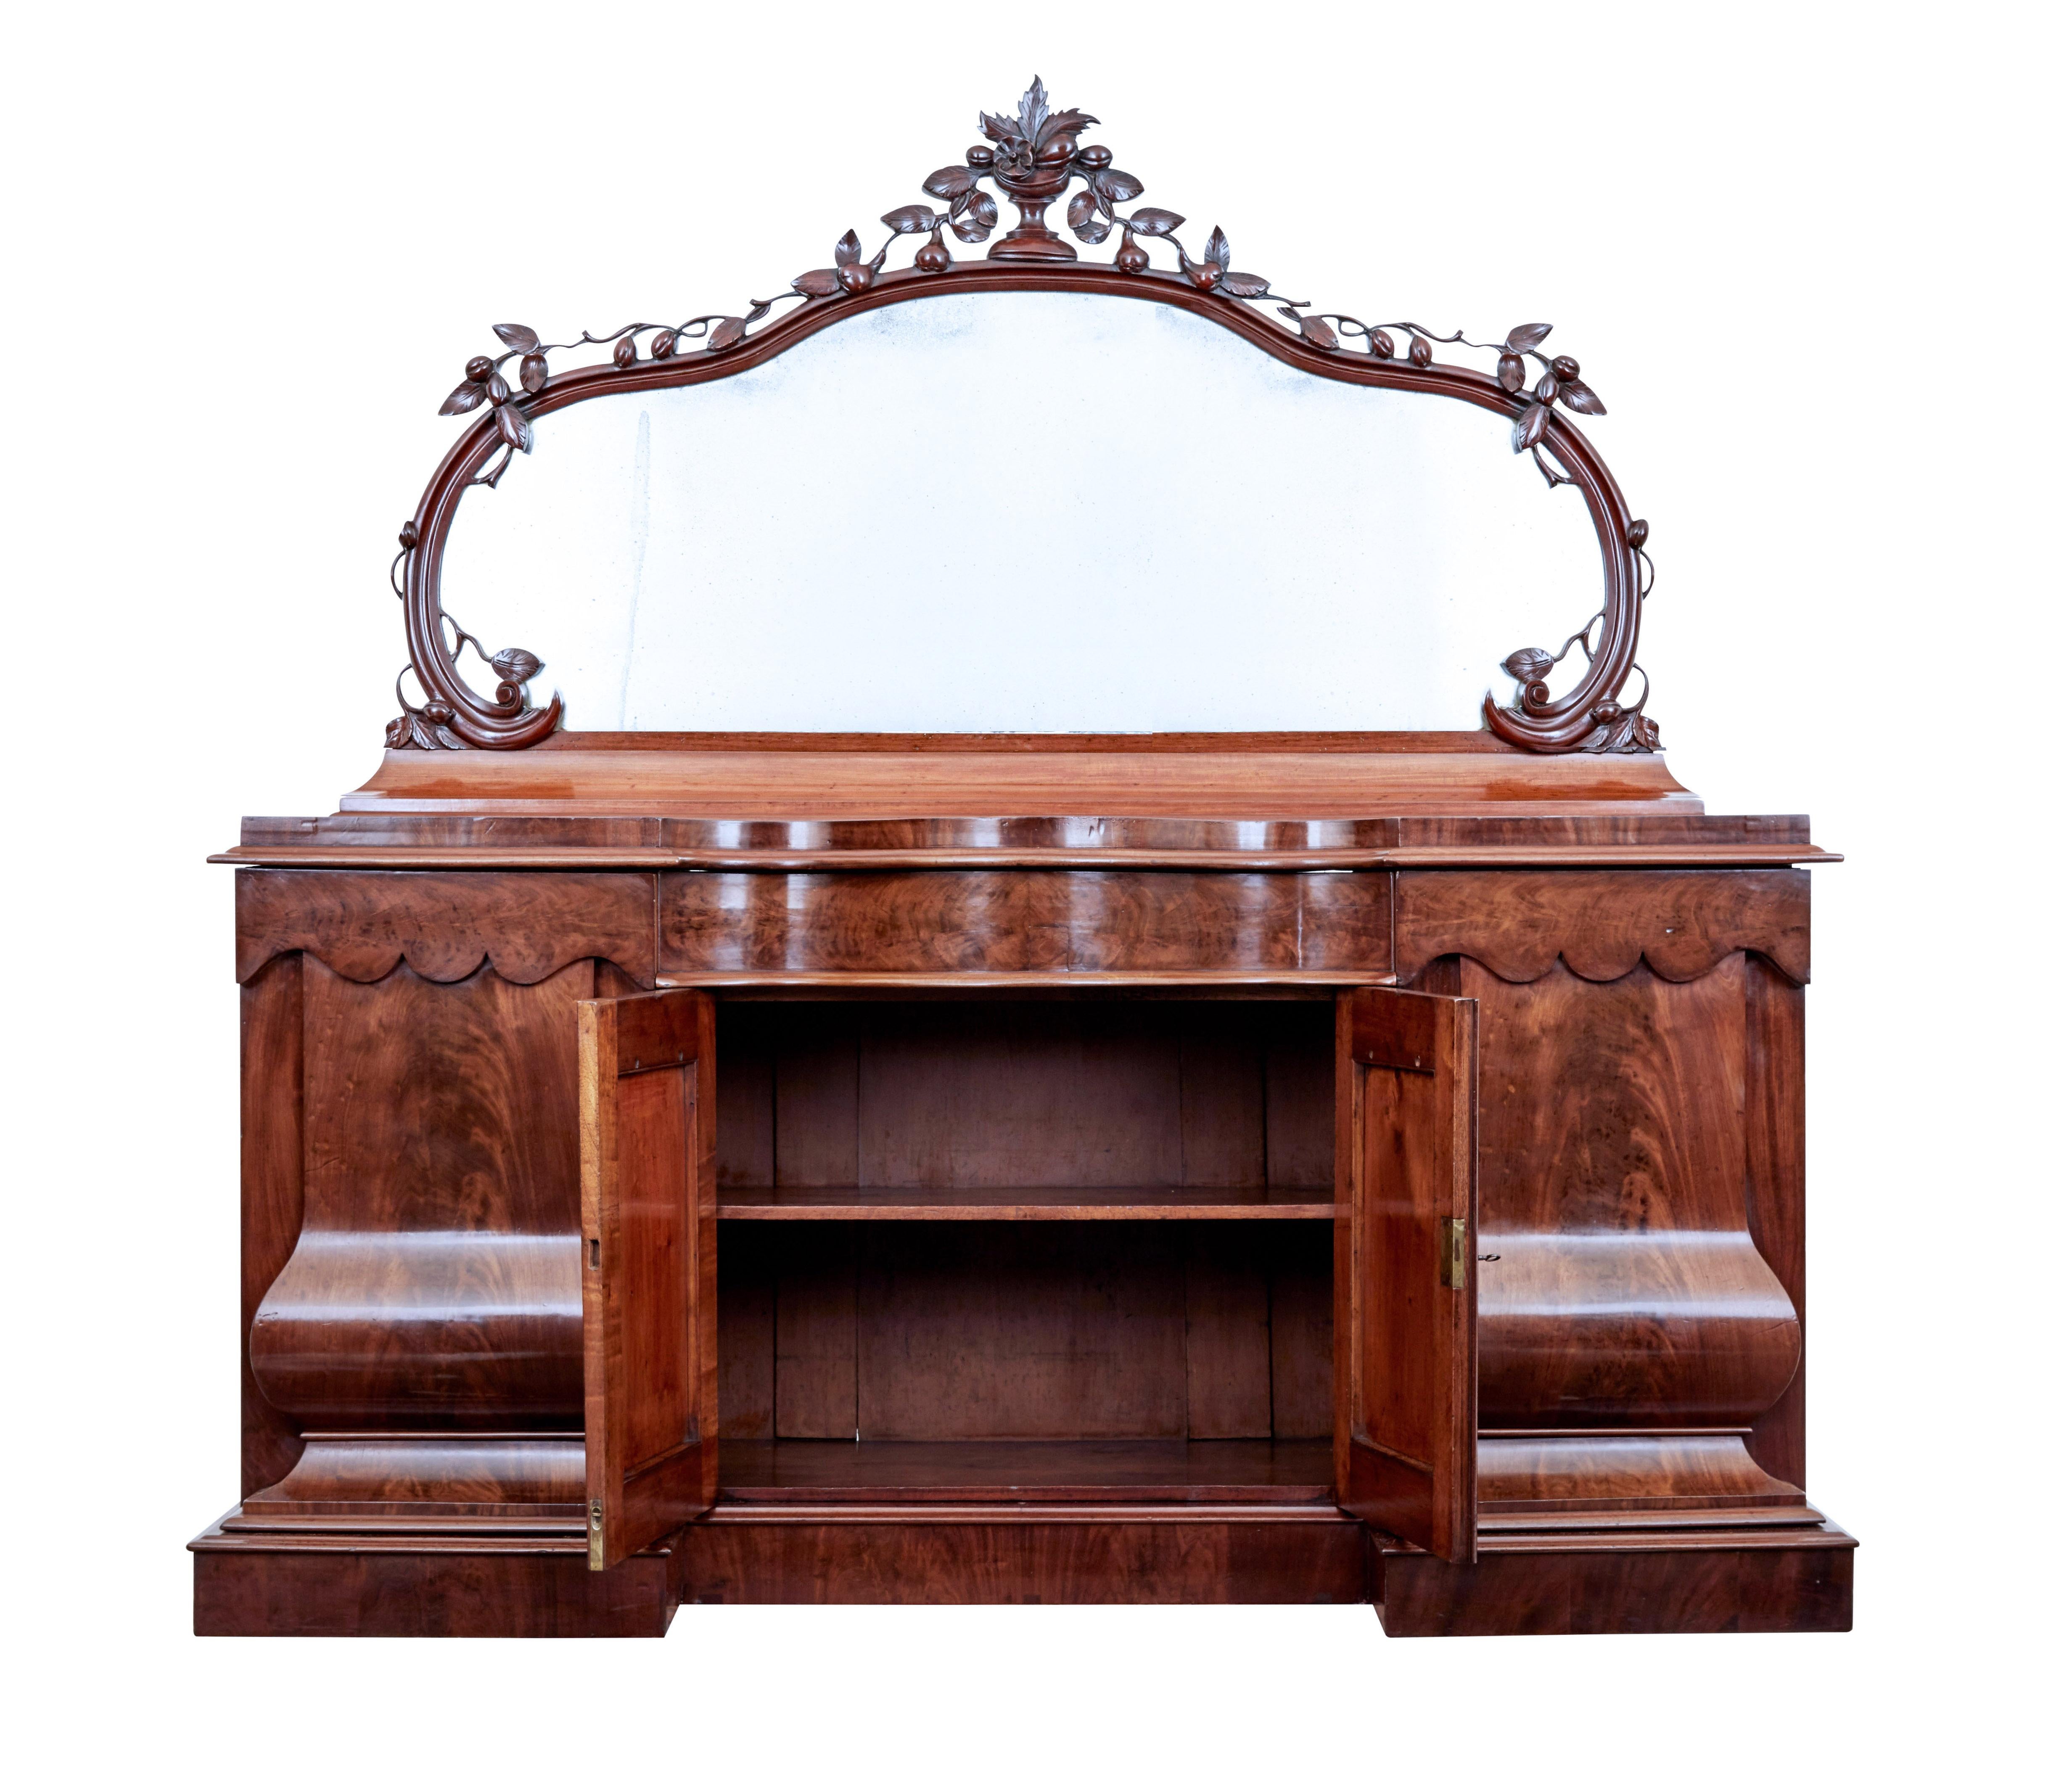 English High Victorian Shaped Flame Mahogany Mirror Topped Sideboard